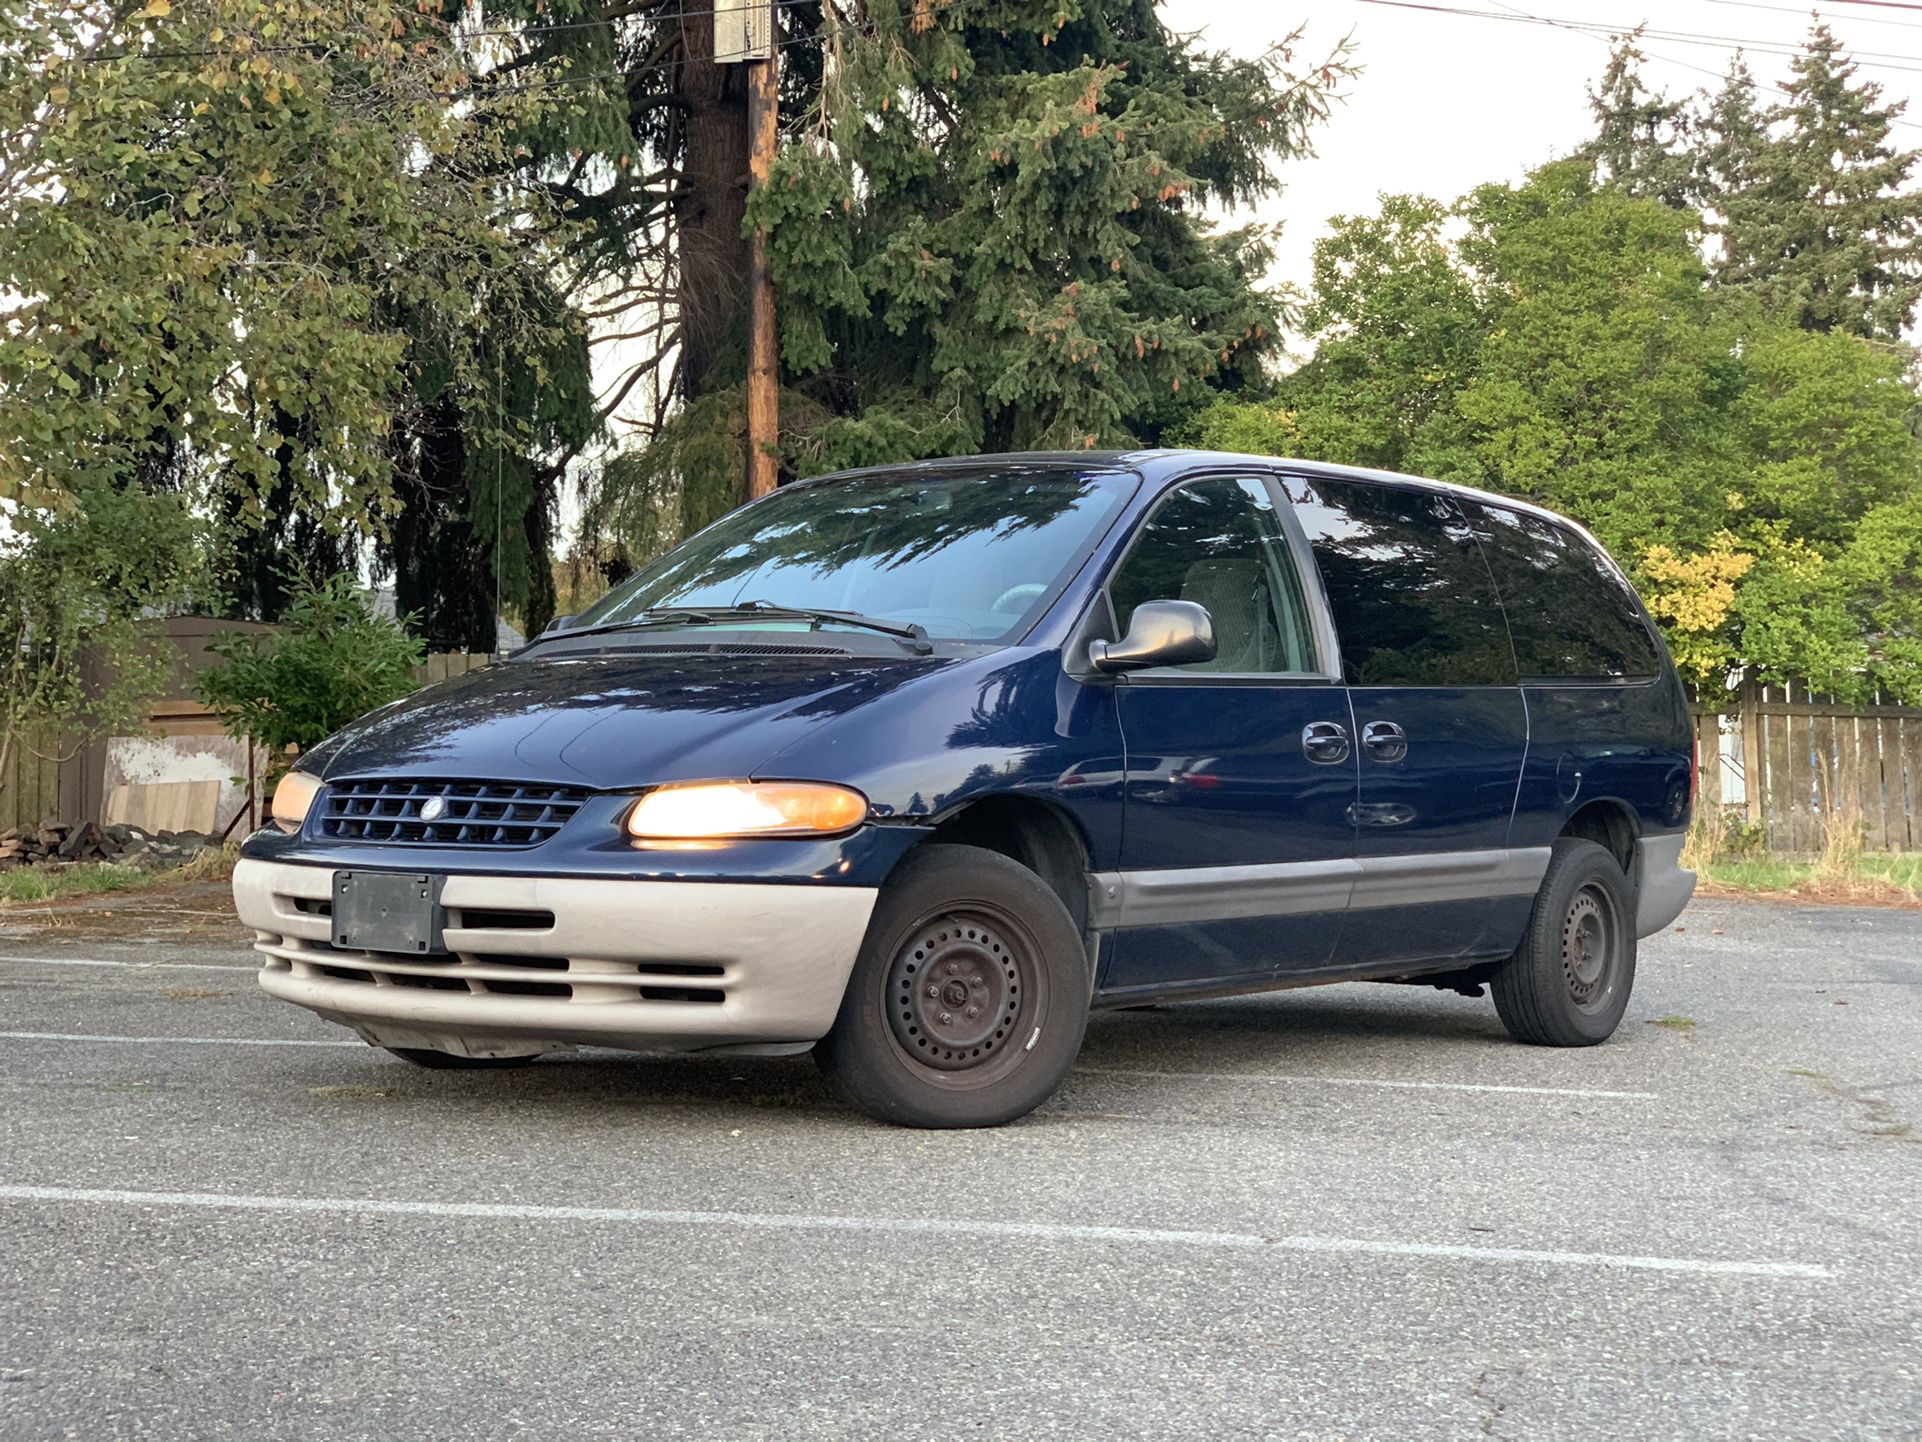 2000 Plymouth Grand Voyager for Sale in Lakewood, WA - OfferUp